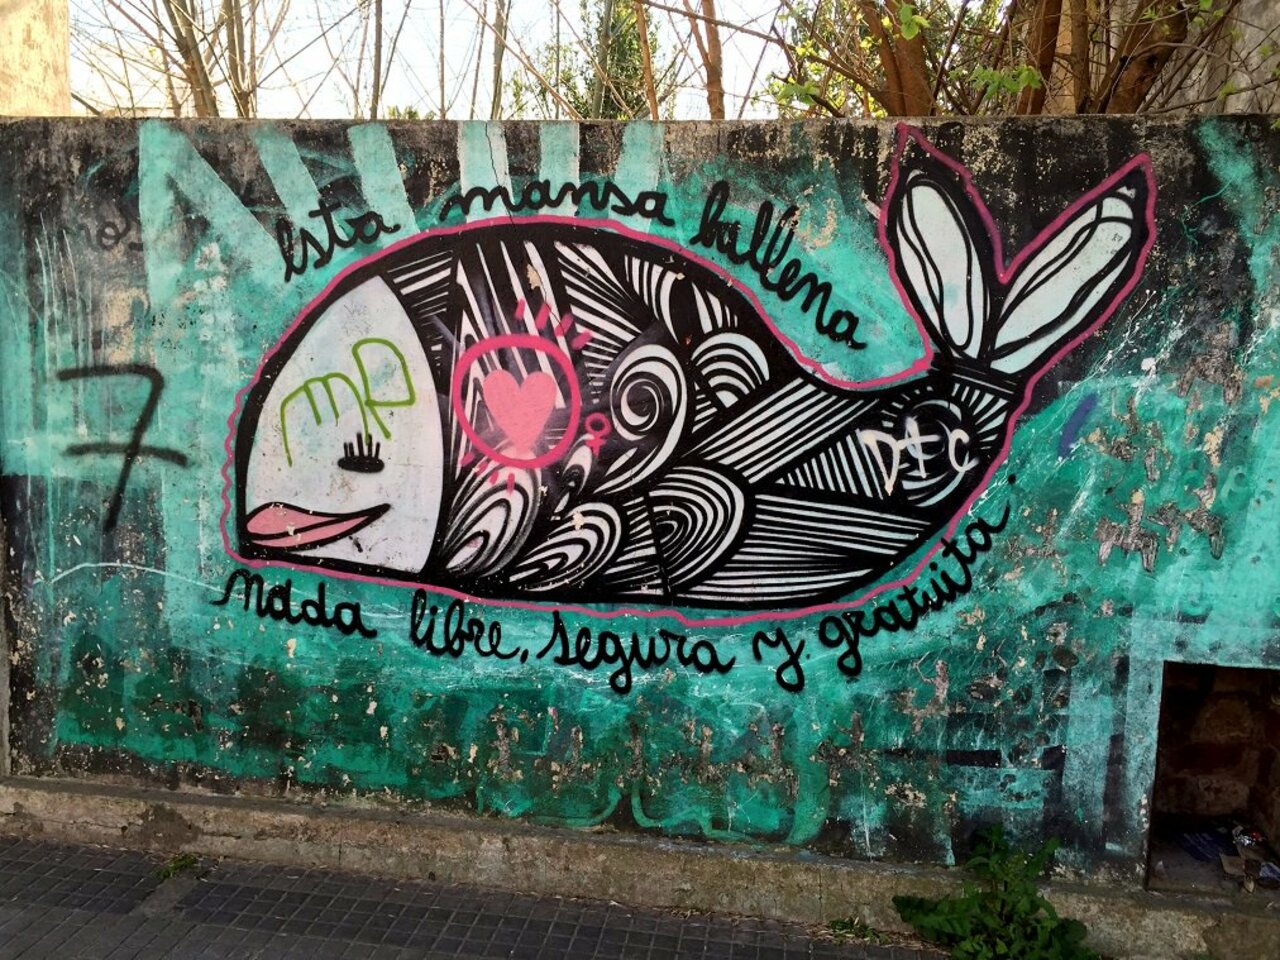 #Graffiti de hoy: « This docile whale swims free, safe and idle...» Calle11 65y66 #LaPlata #Argentina #StreetArt https://t.co/32YlAHXExf